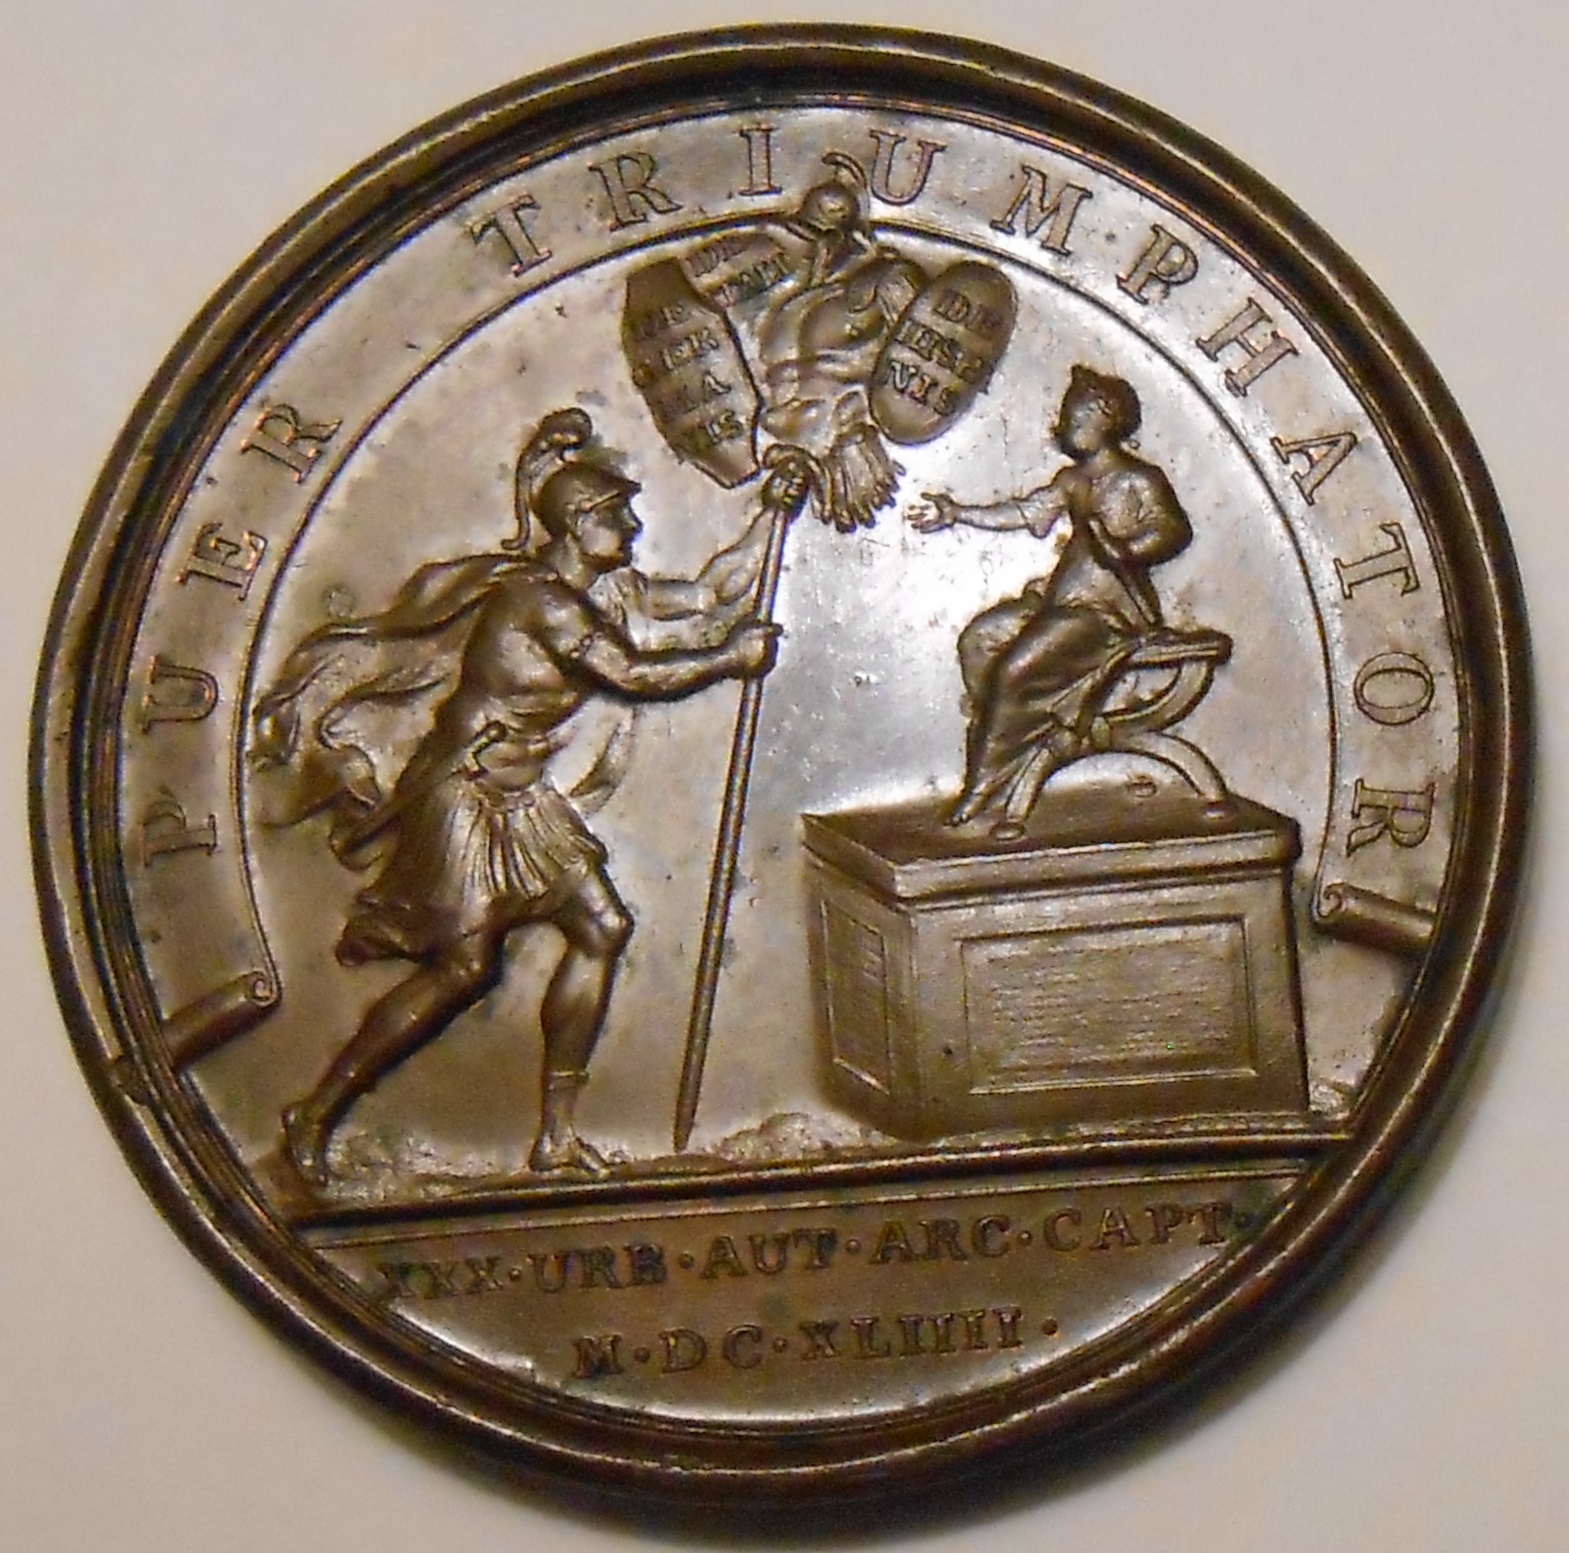 2frenchlouisthe14thmedals 1644.jpg